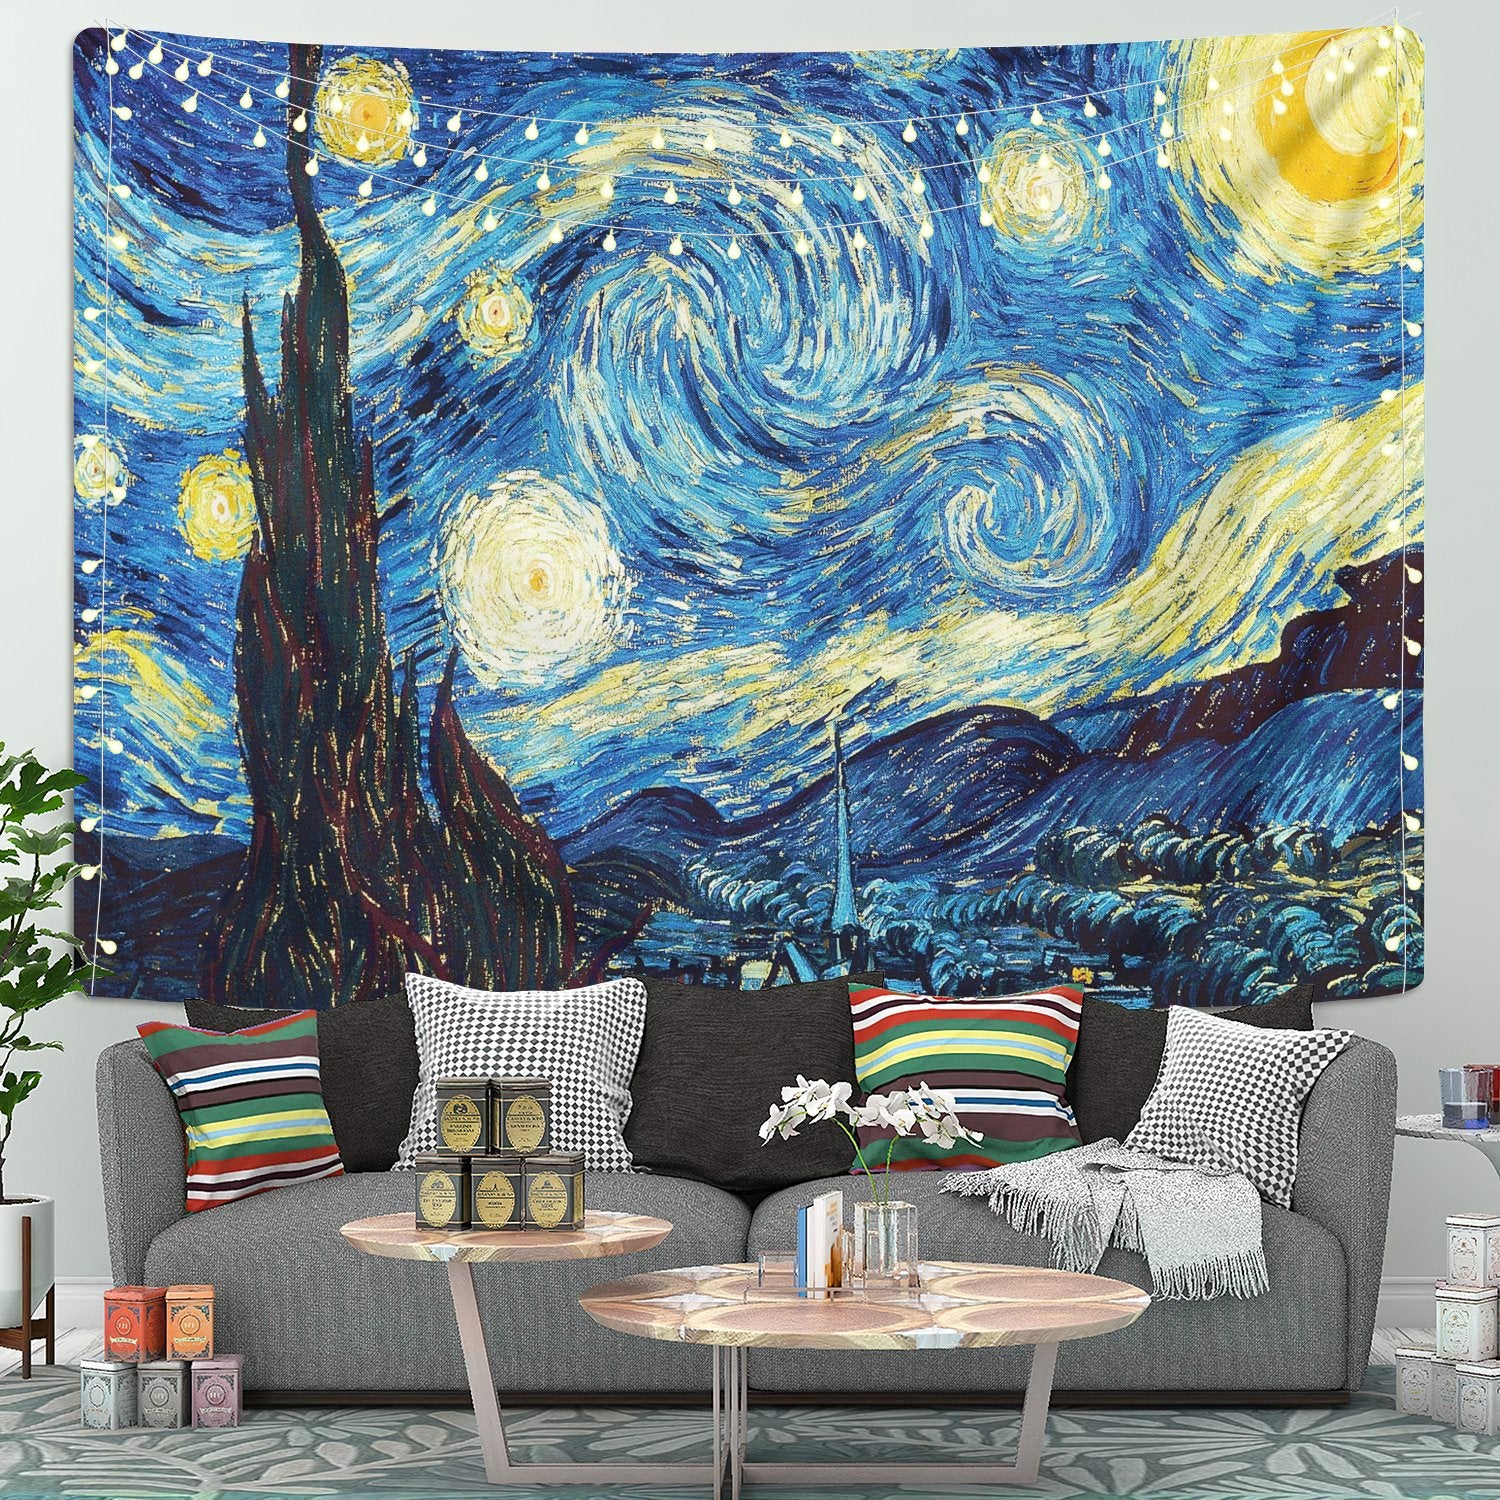 The Starry Night Tapestry Room Decor